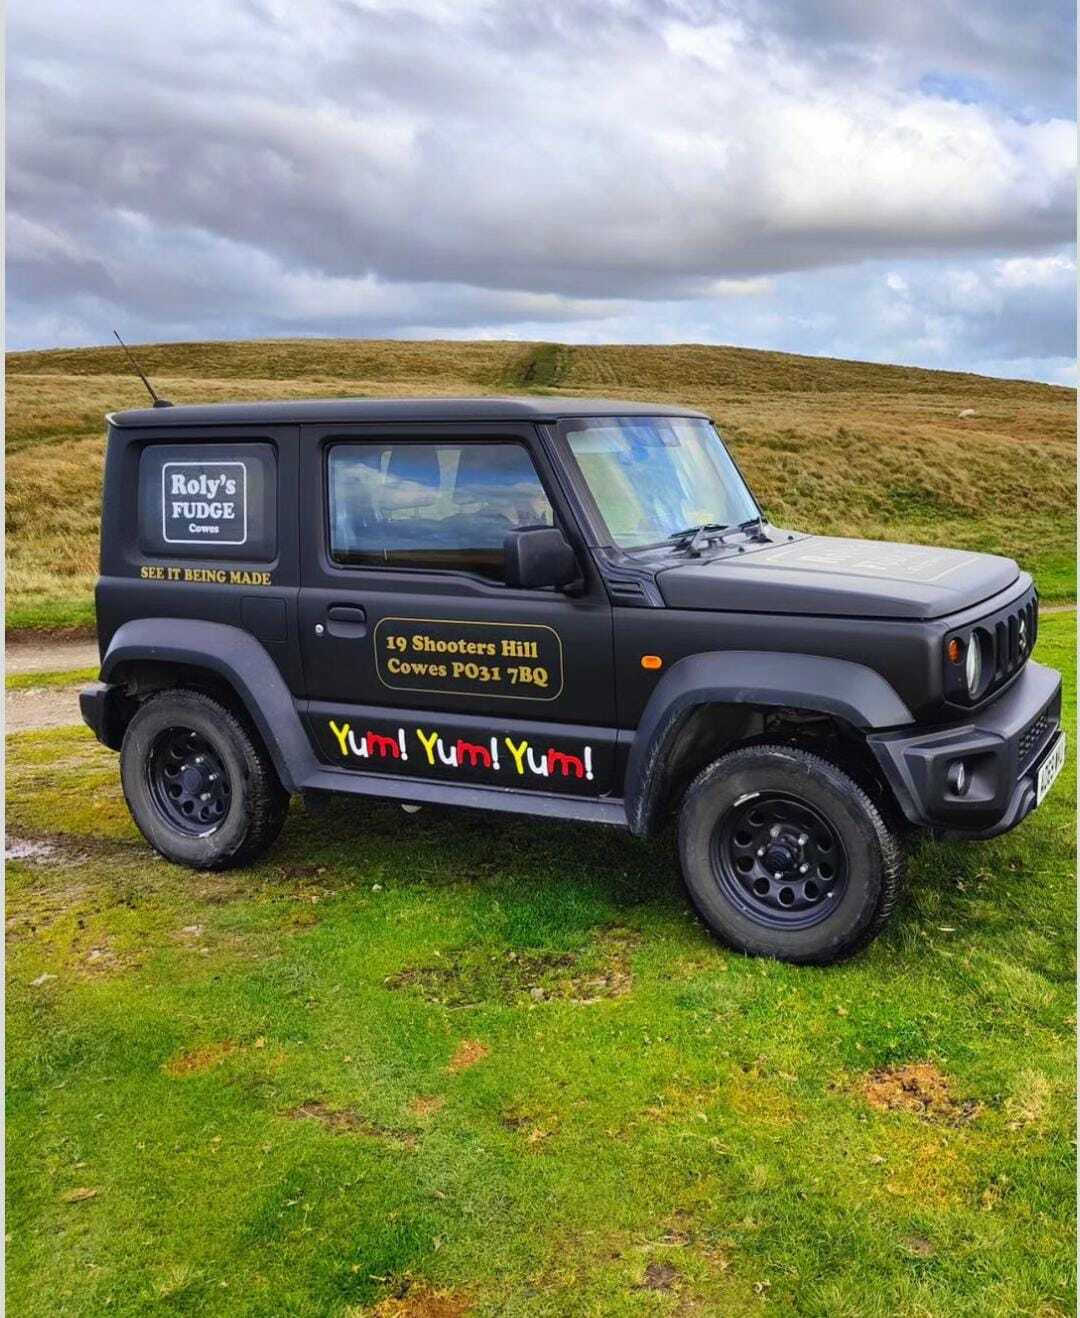 Roly's Fudge Cowes - James the Jimny